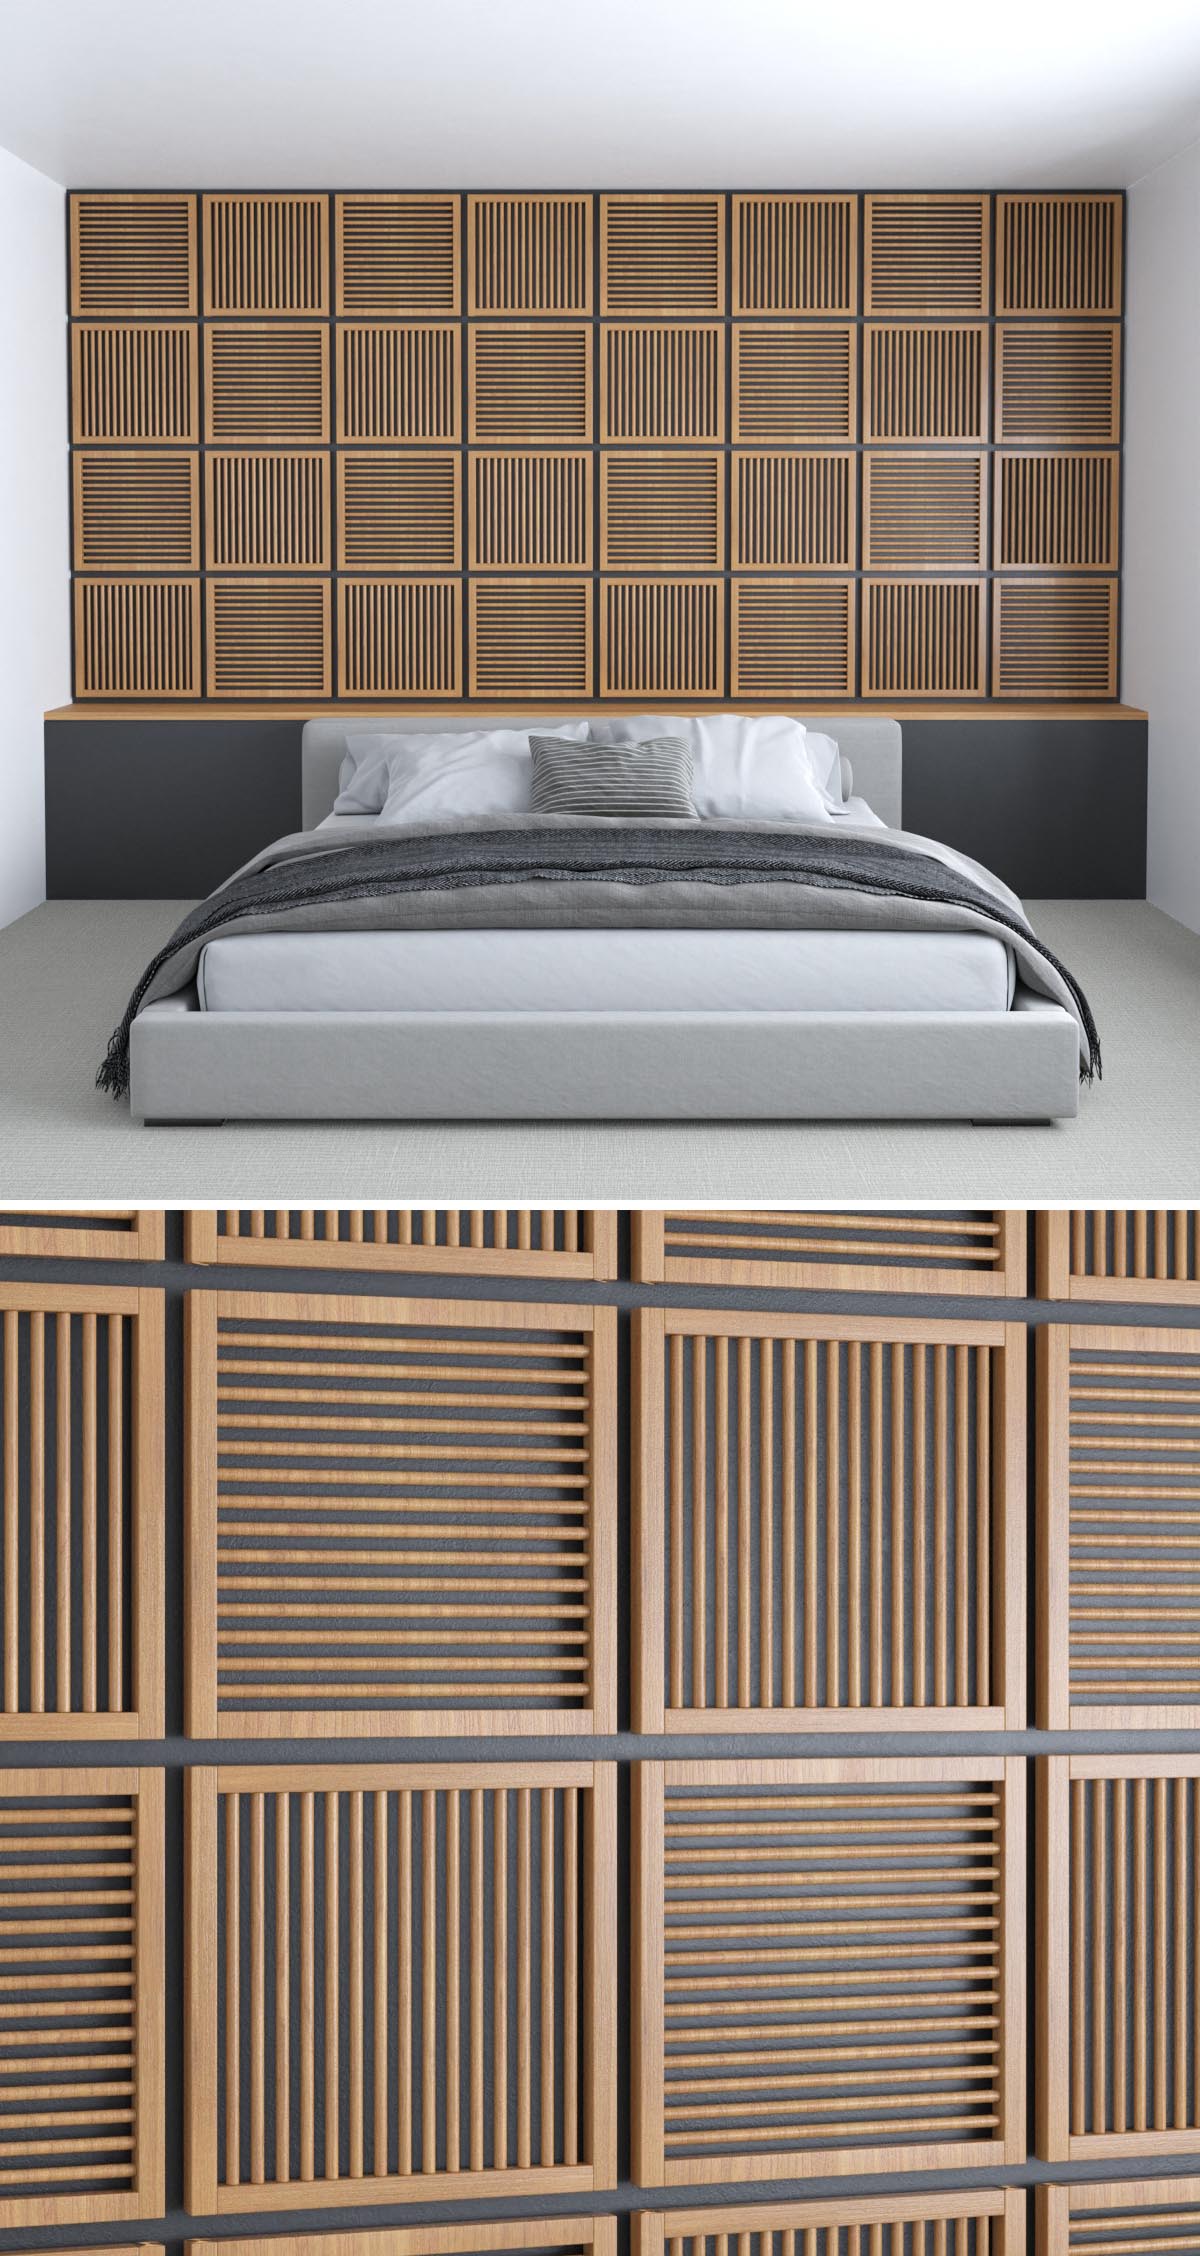 Wood shutters, often found on the exterior of a home, were the inspiration behind this wood wall accent design, with a collection of frames filled with wood dowels making up the wall.